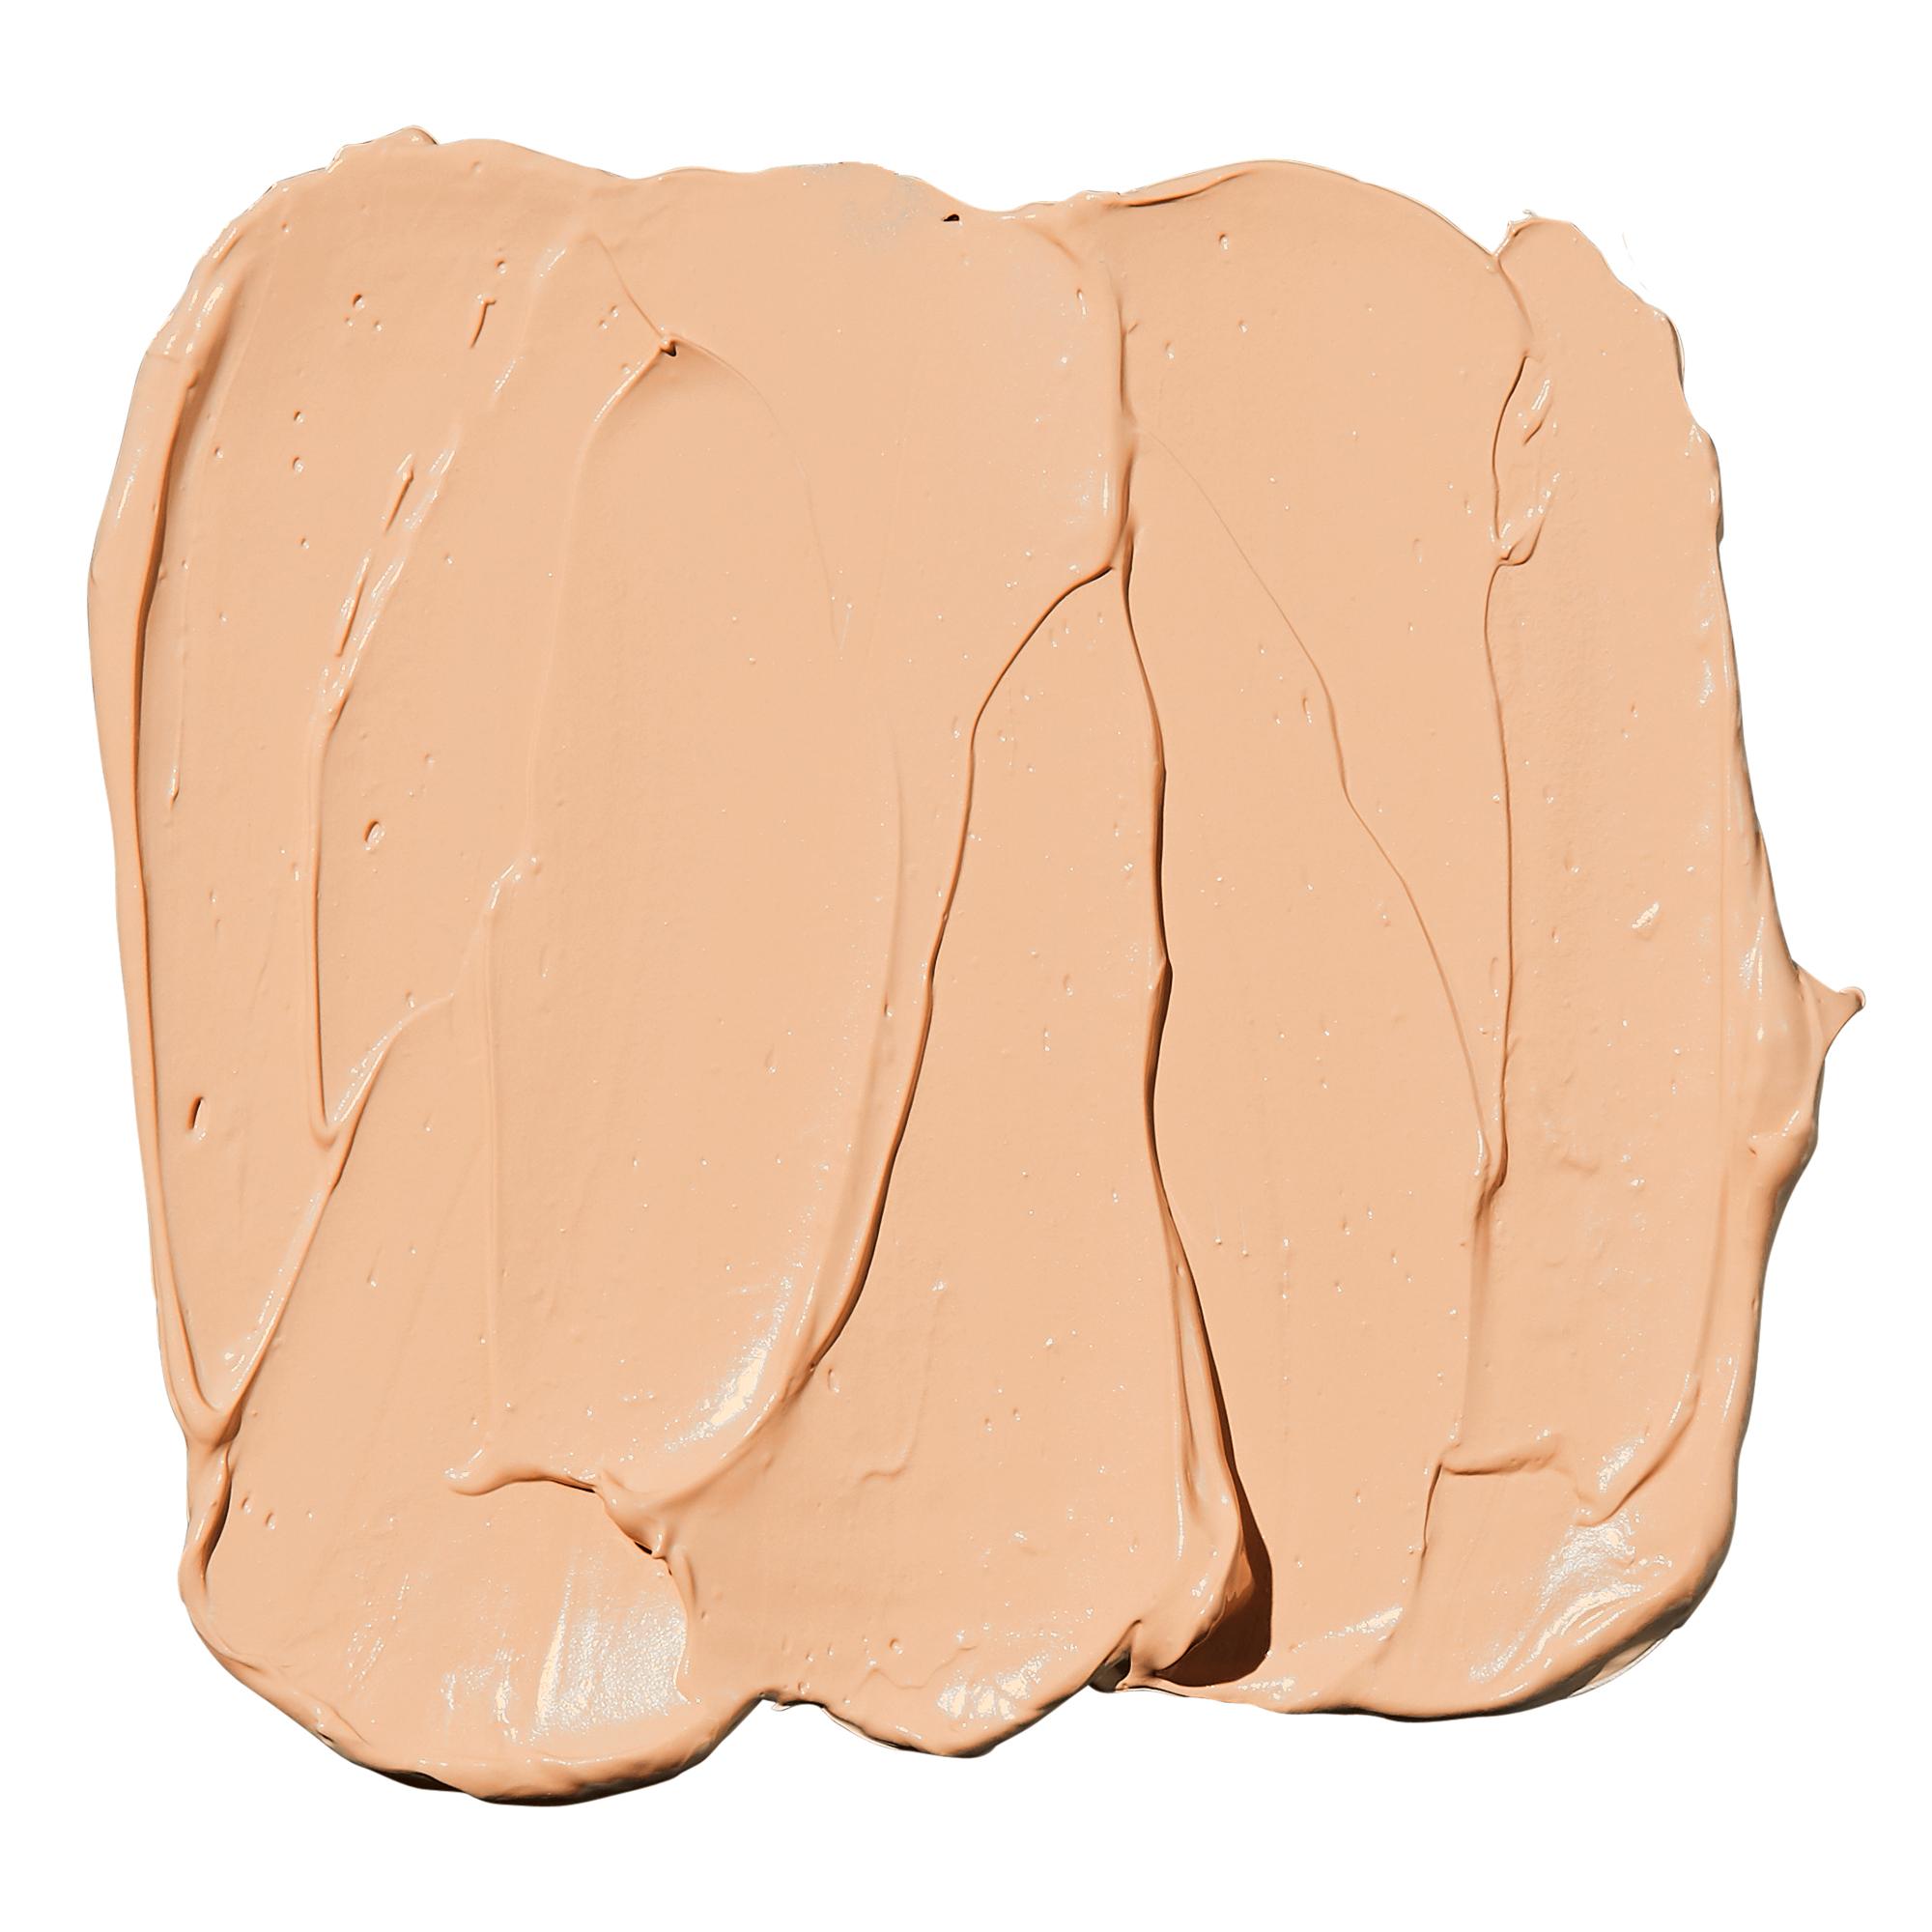 e.l.f. Flawless Satin Foundation, Bisque, 0.68 fl oz - image 2 of 7